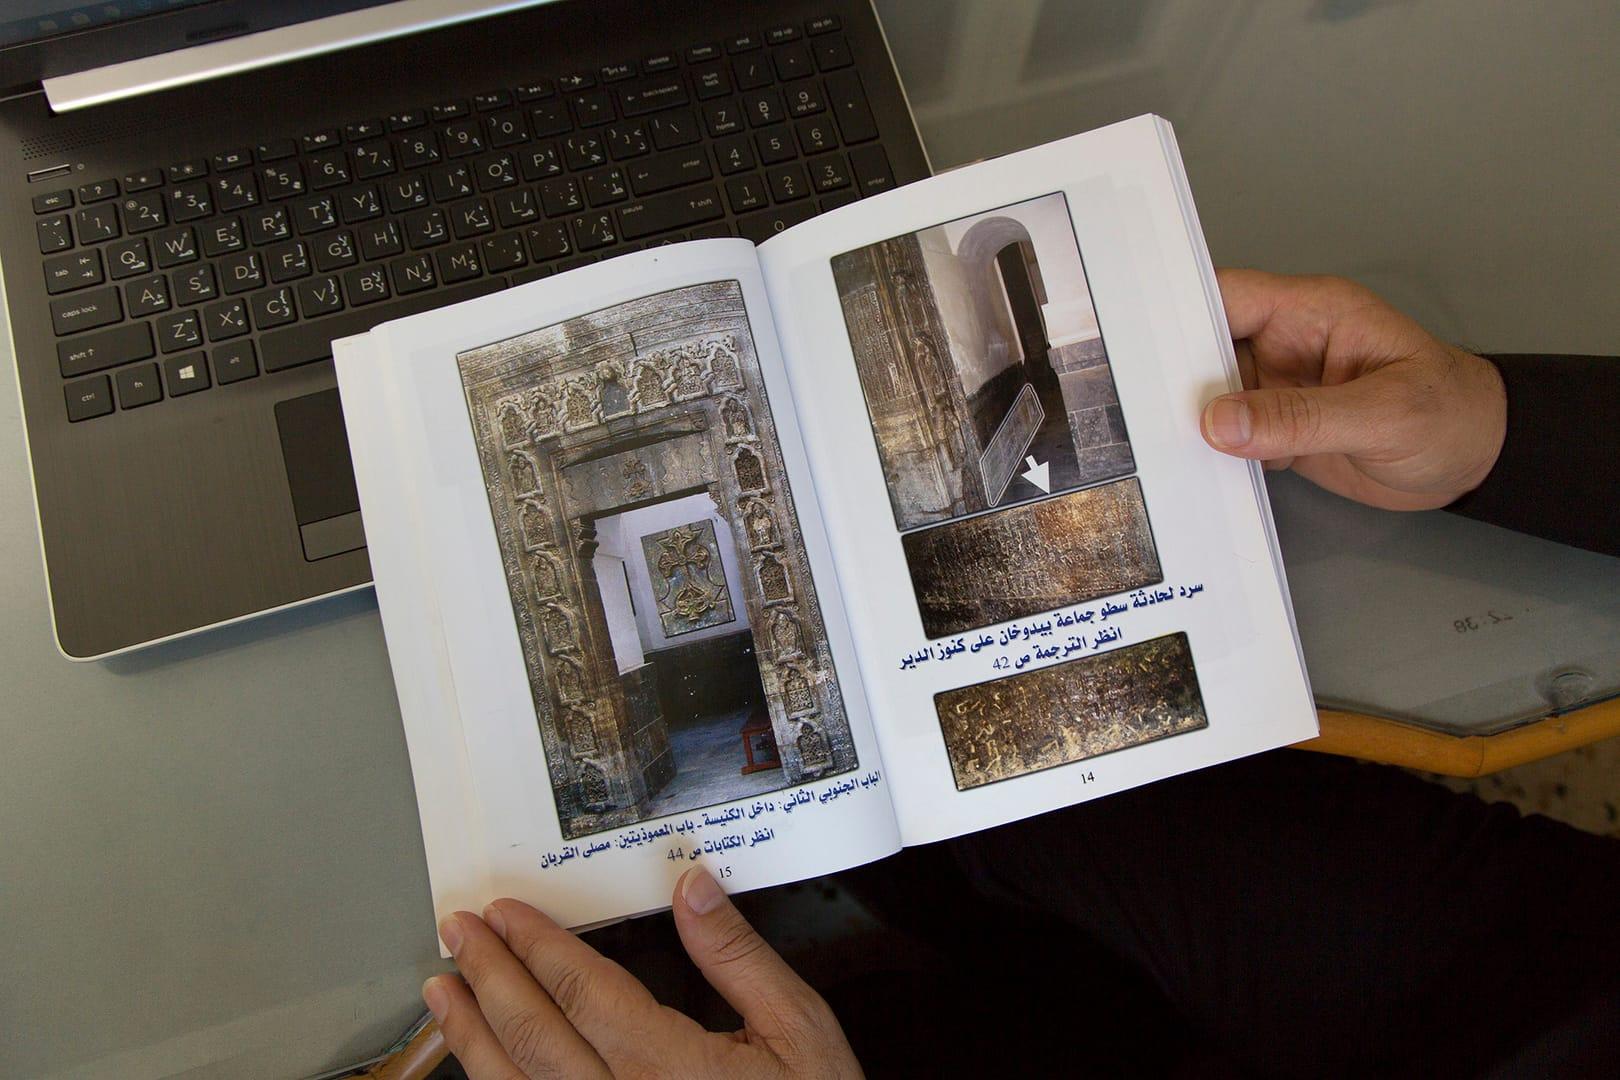 When Islamic State came, Iraqi monks had just finished hiding manuscripts